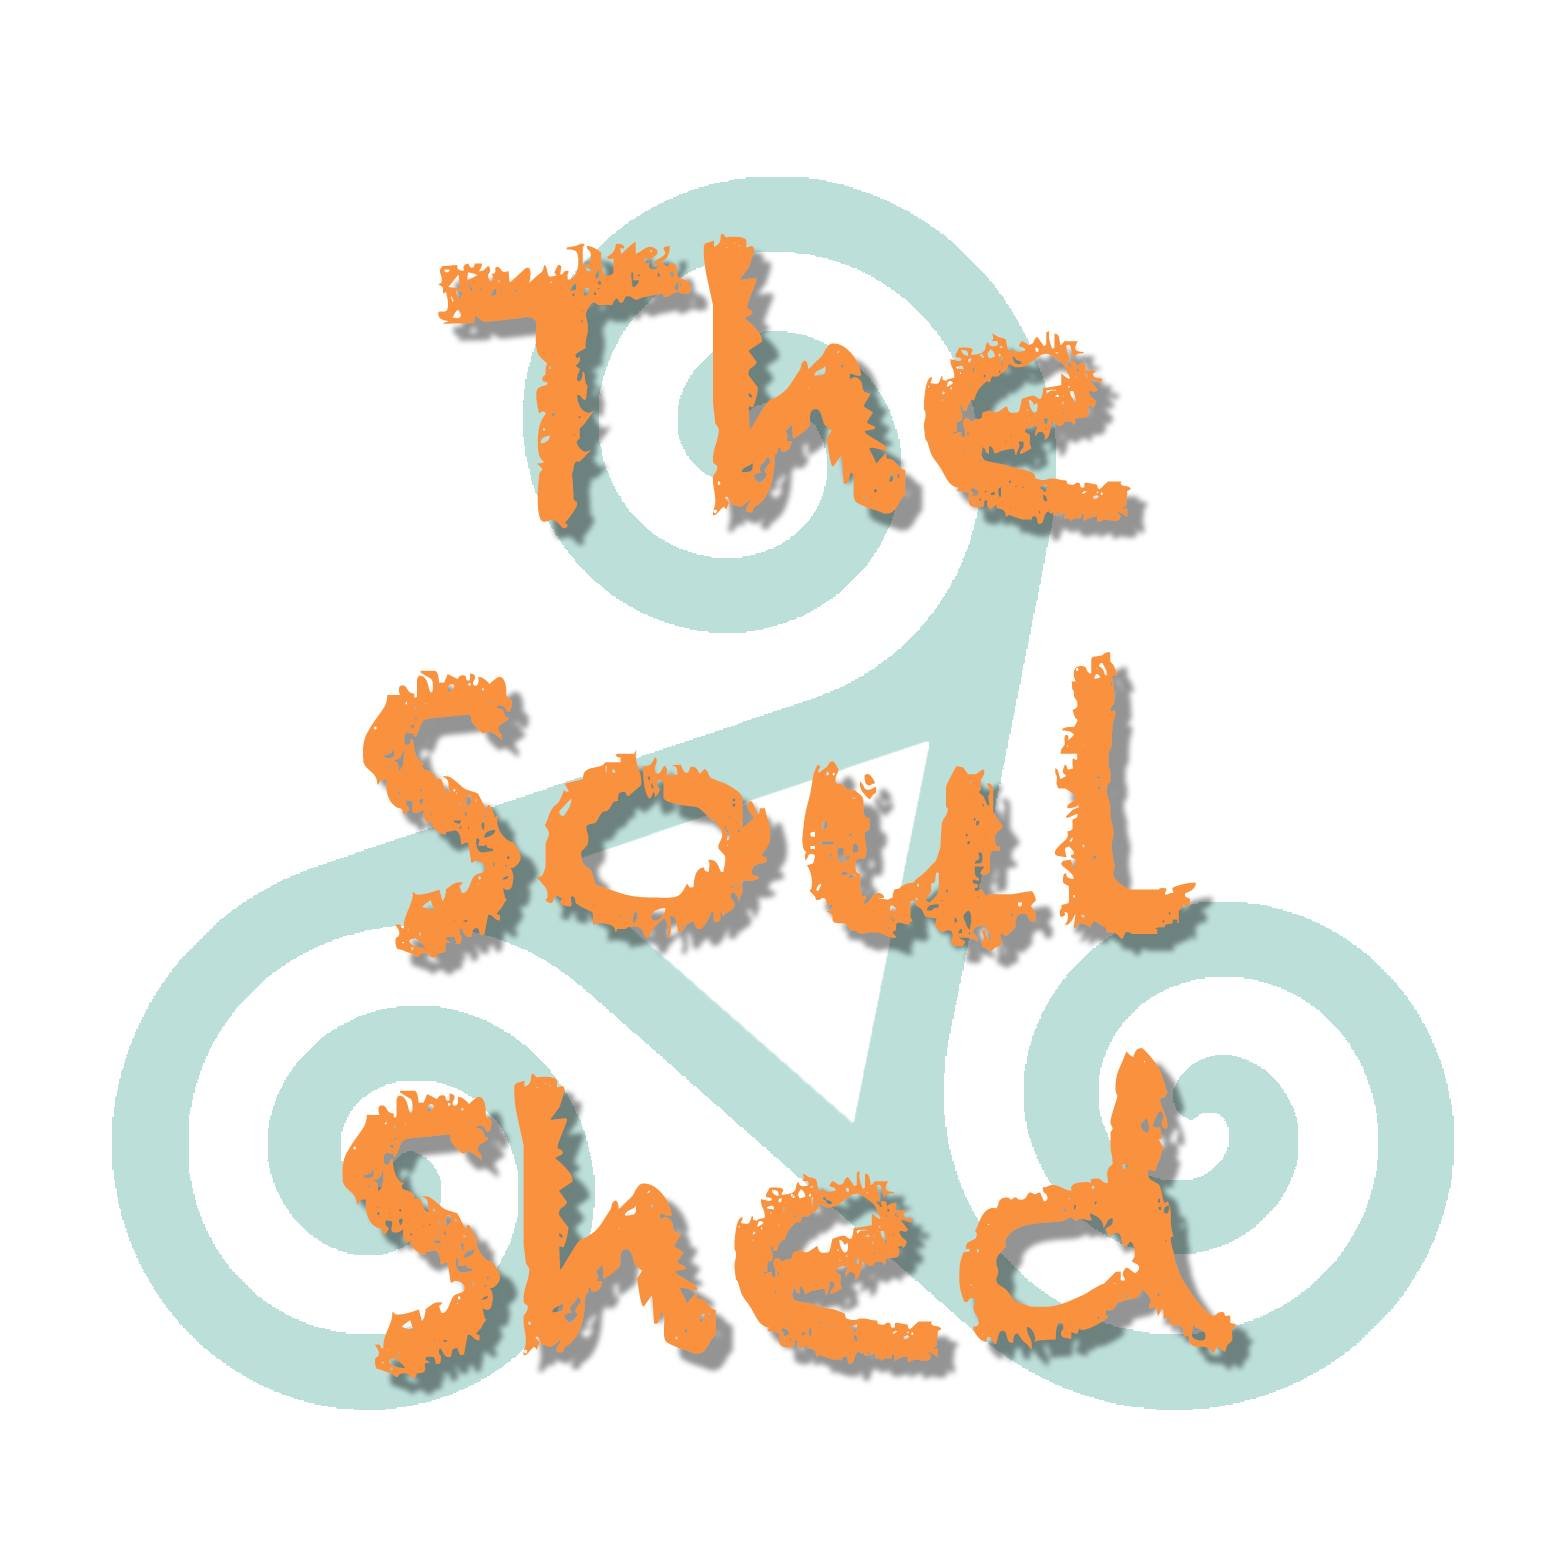 The Soul Shed logo